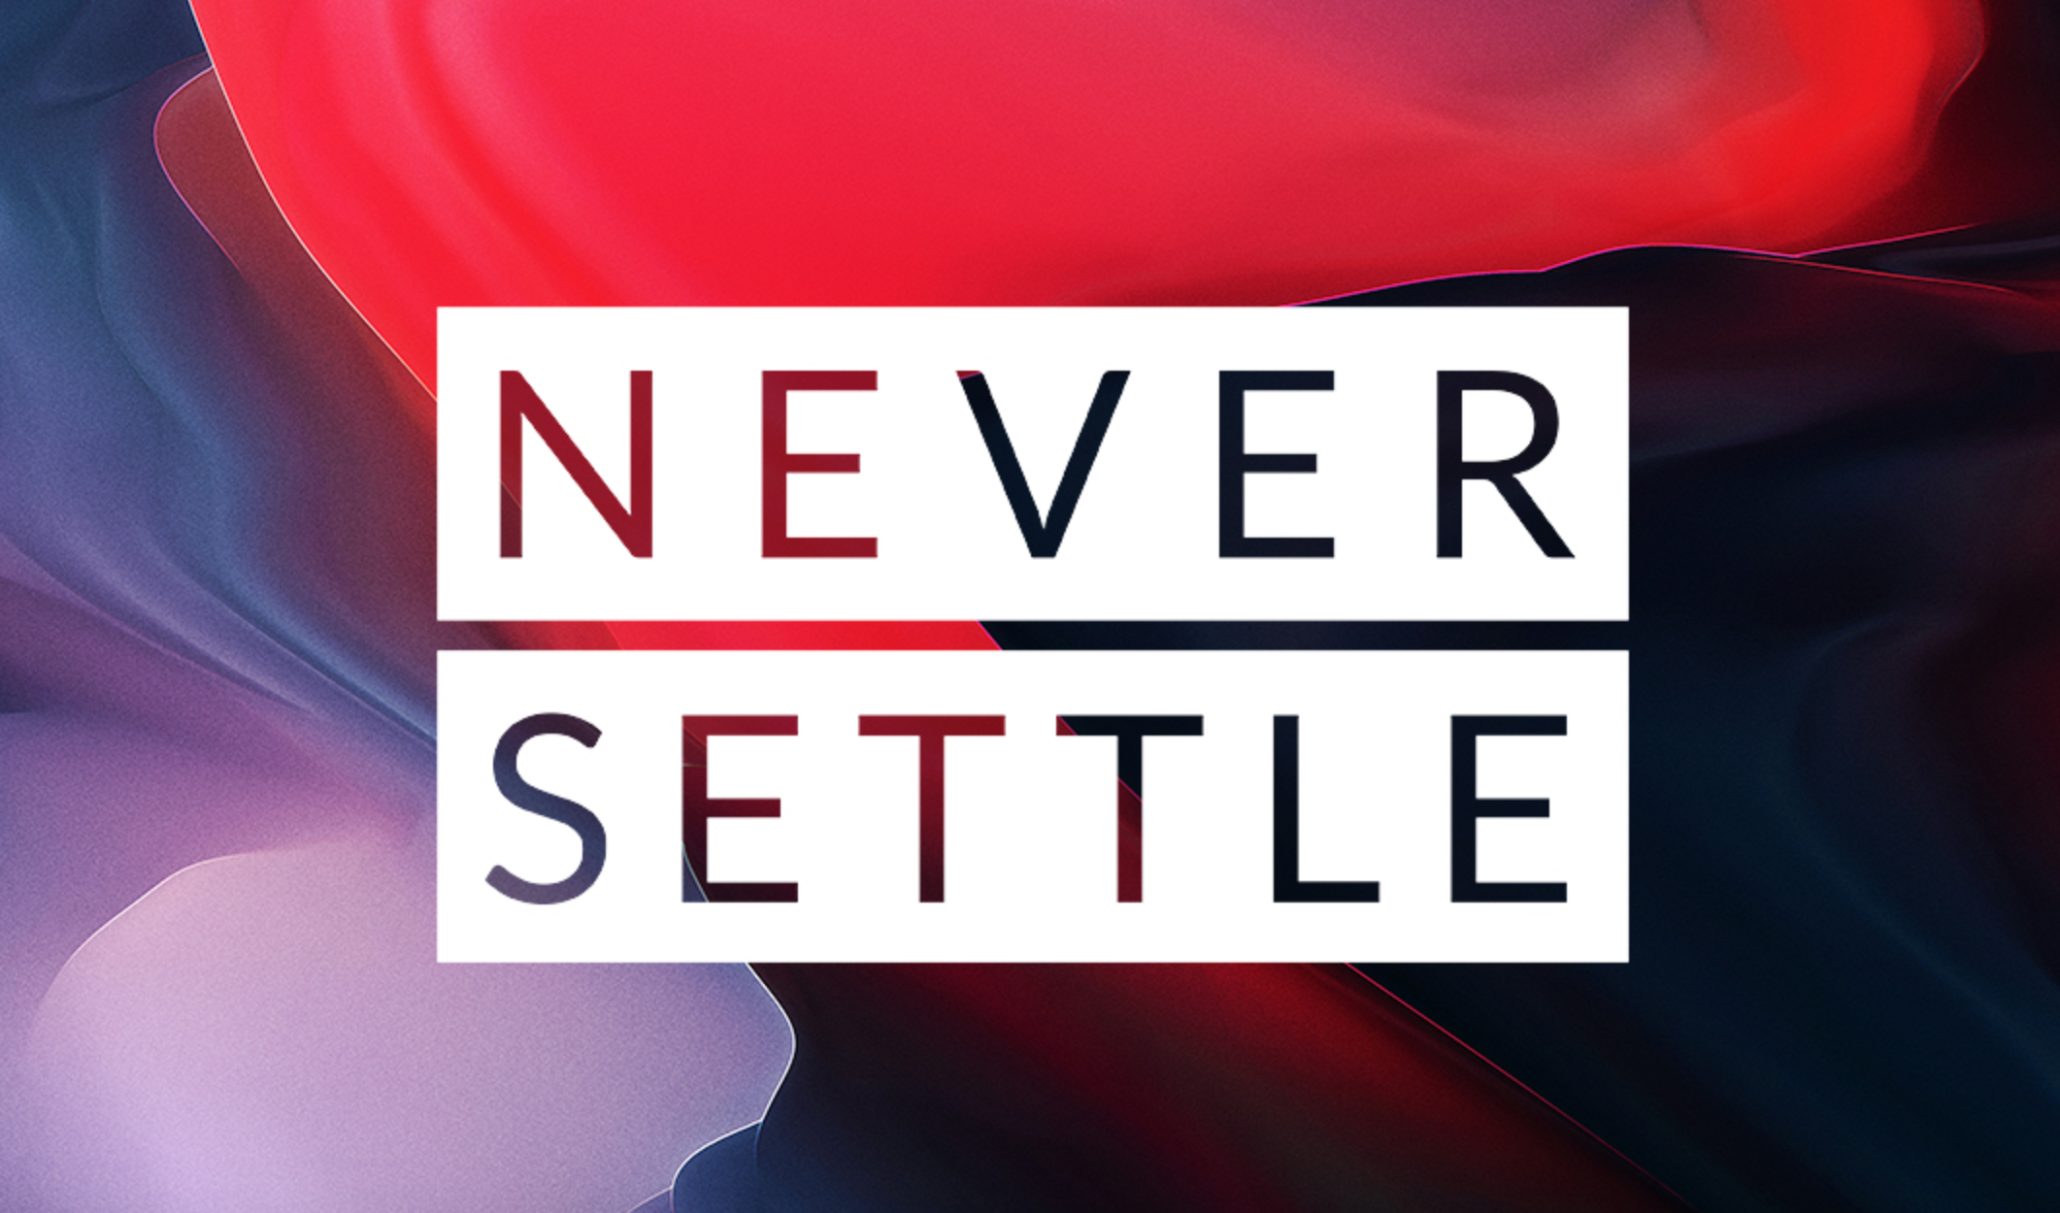 never settle wallpaper hd,red,text,font,material property,graphic design